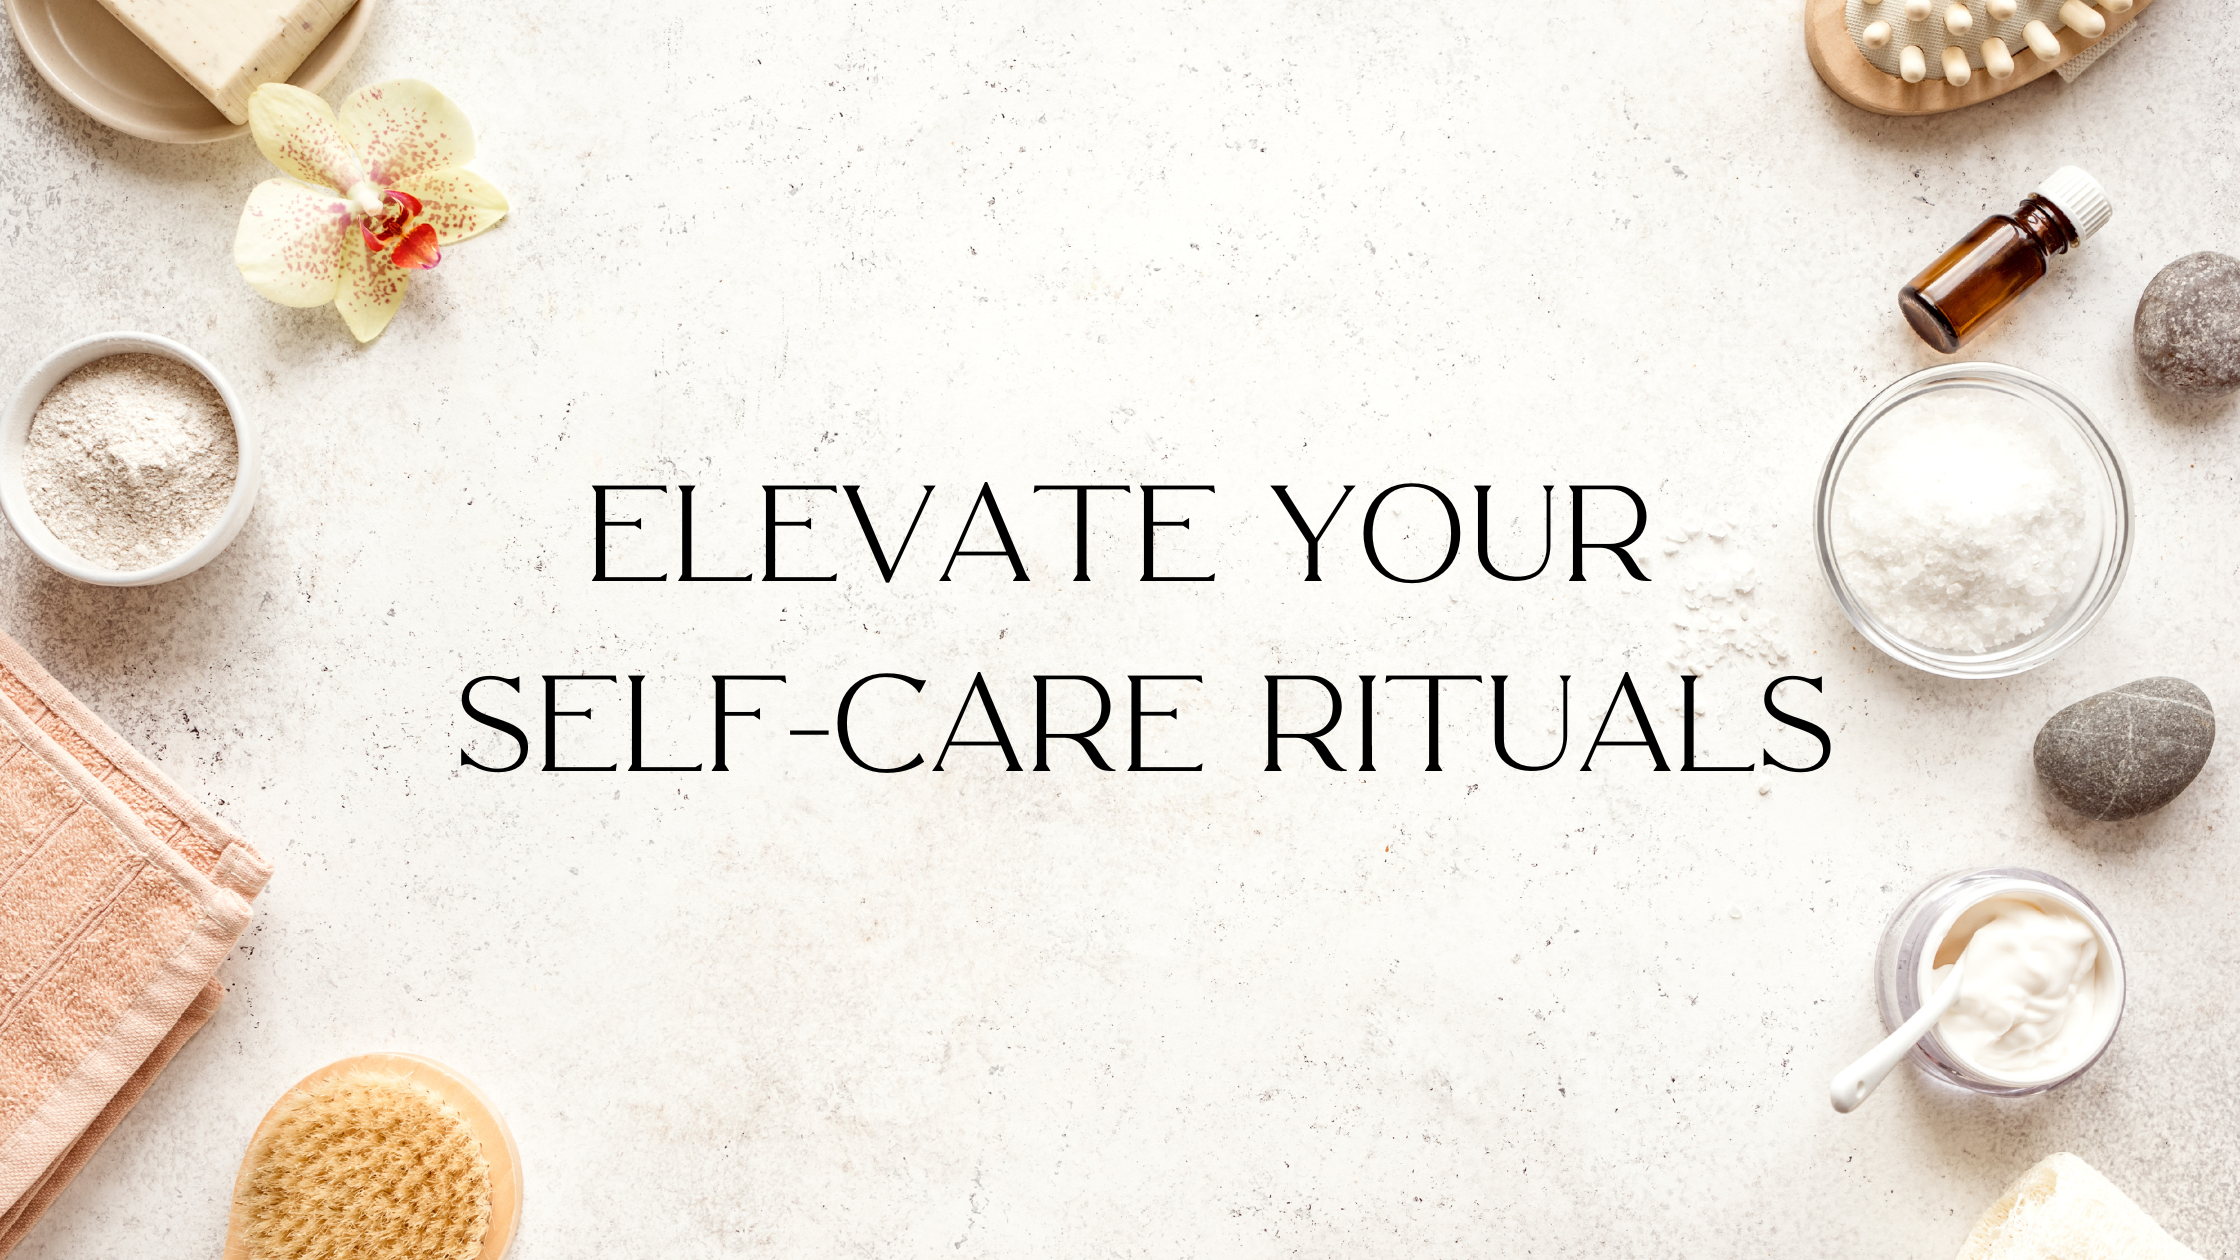 Blog post reading elevate your self-care rituals